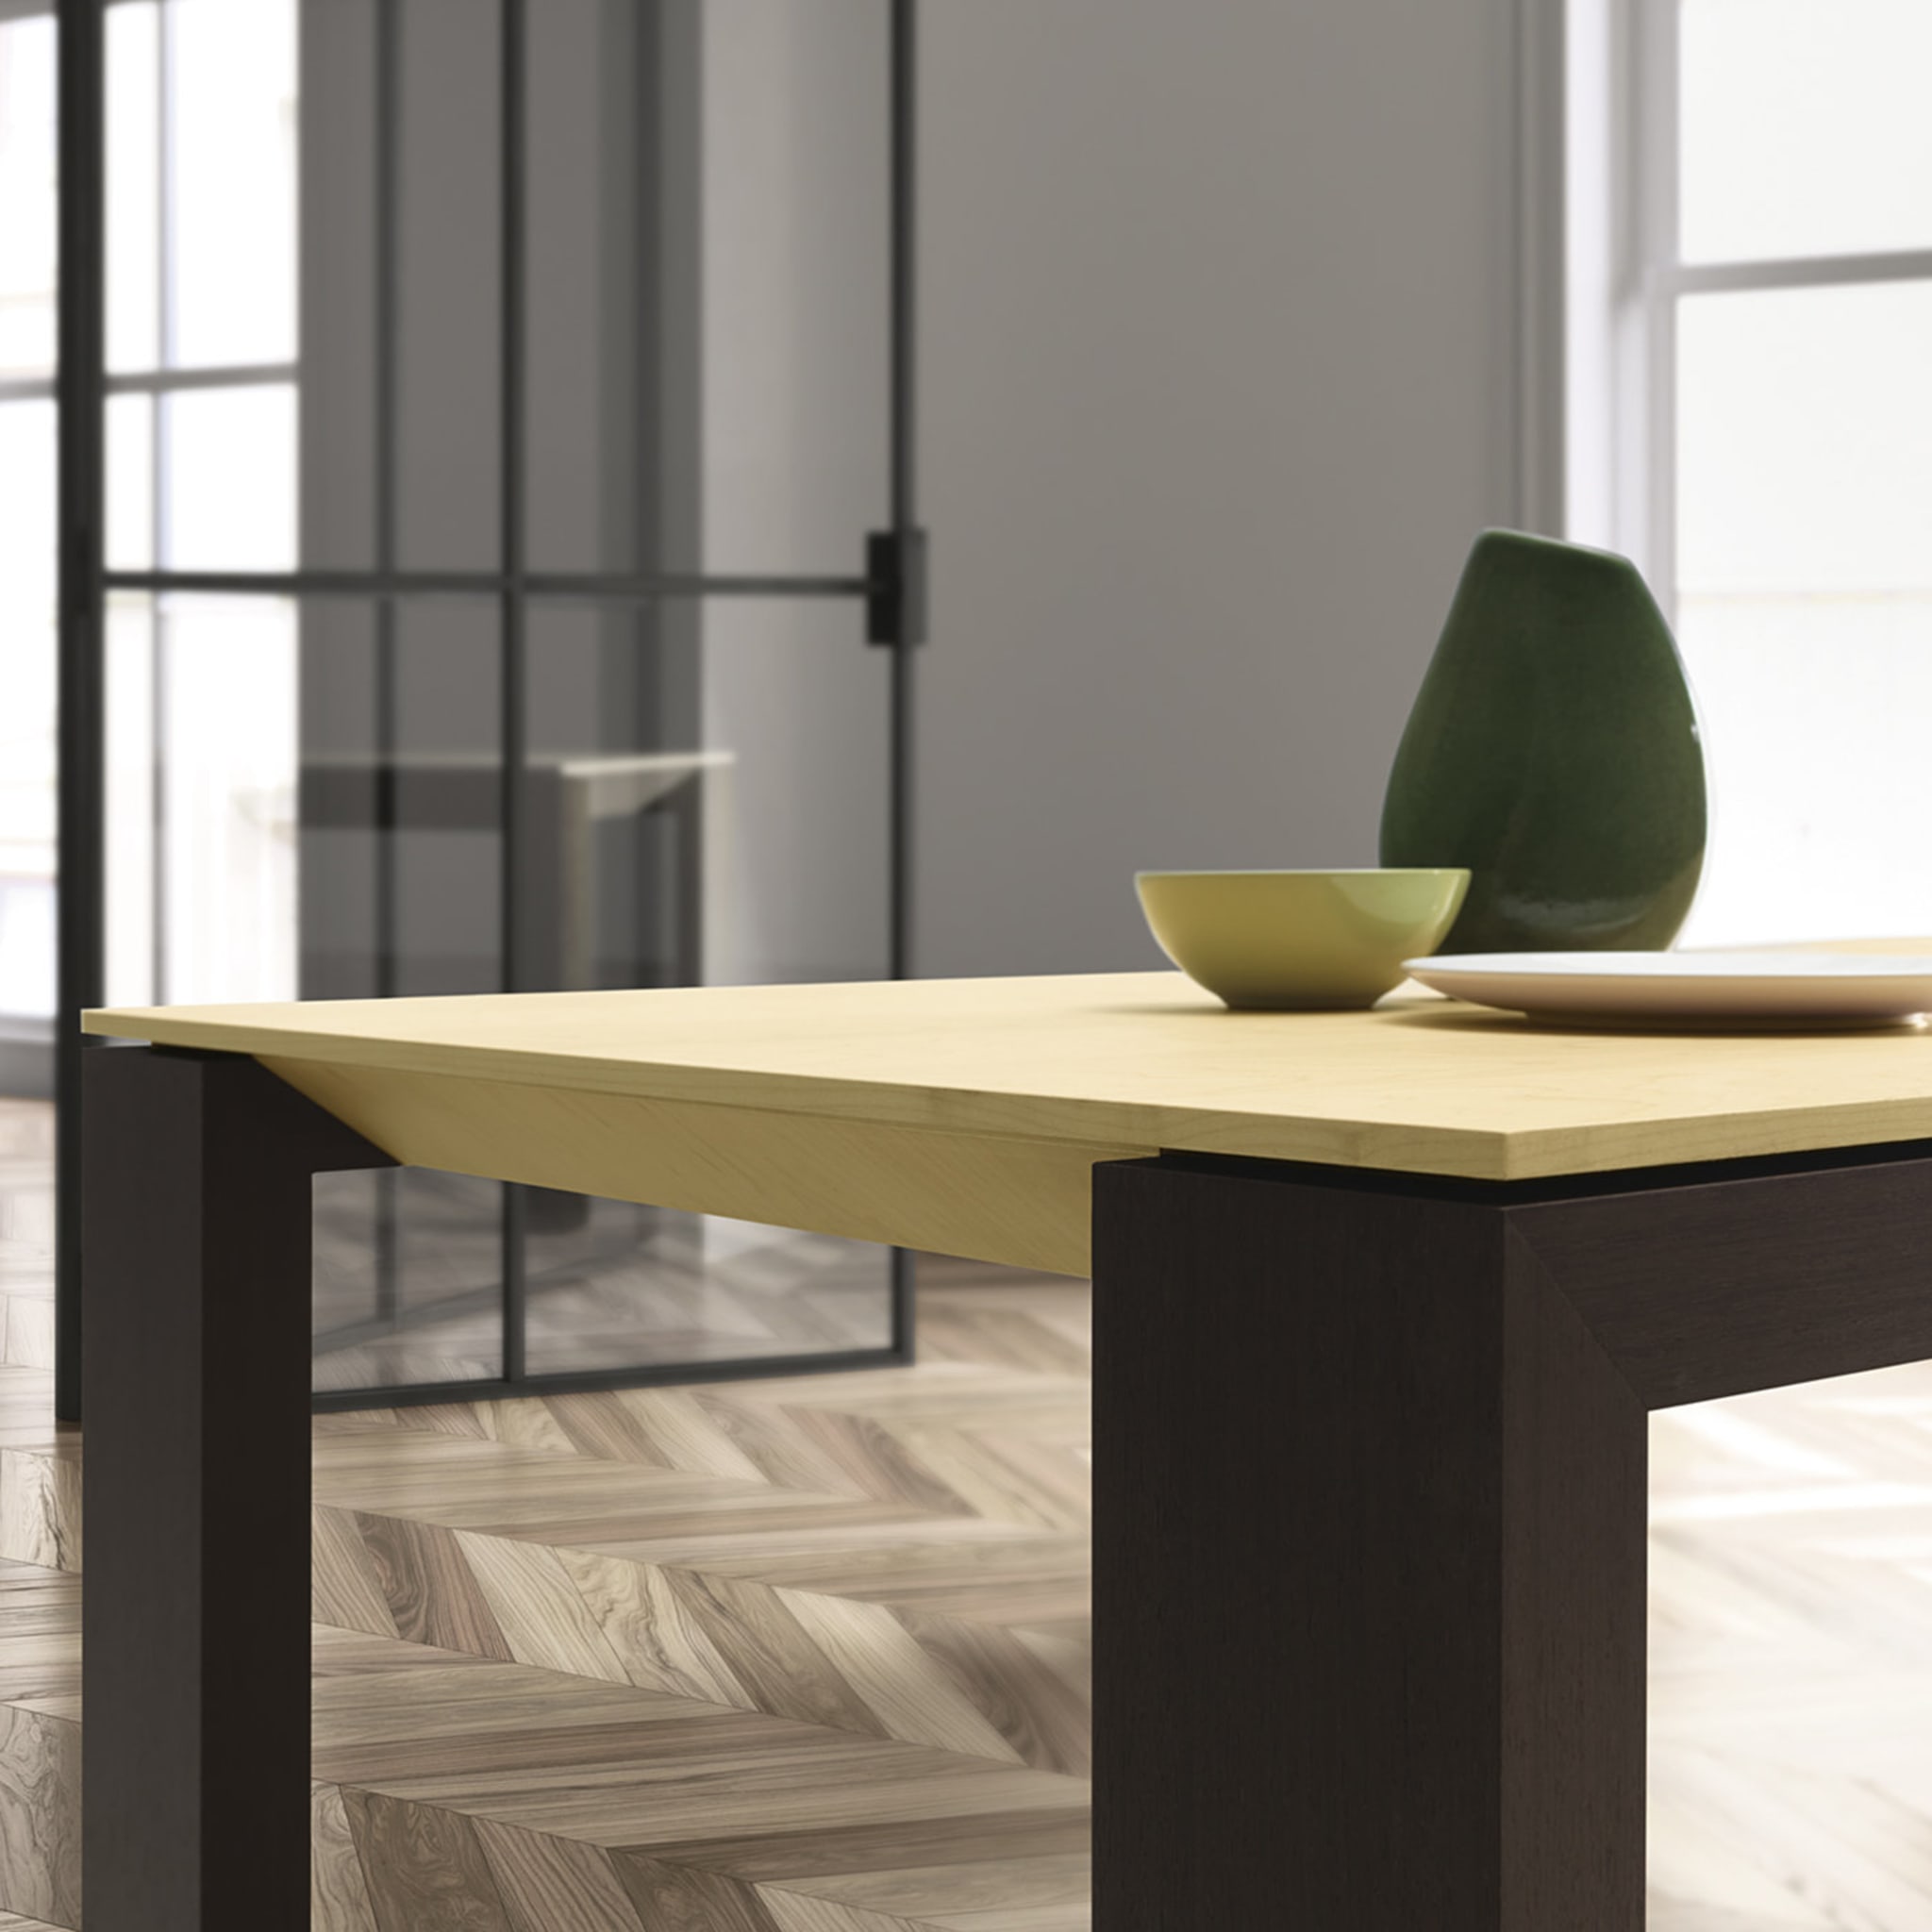 Pedaso Wood Dining Table - Alternative view 1